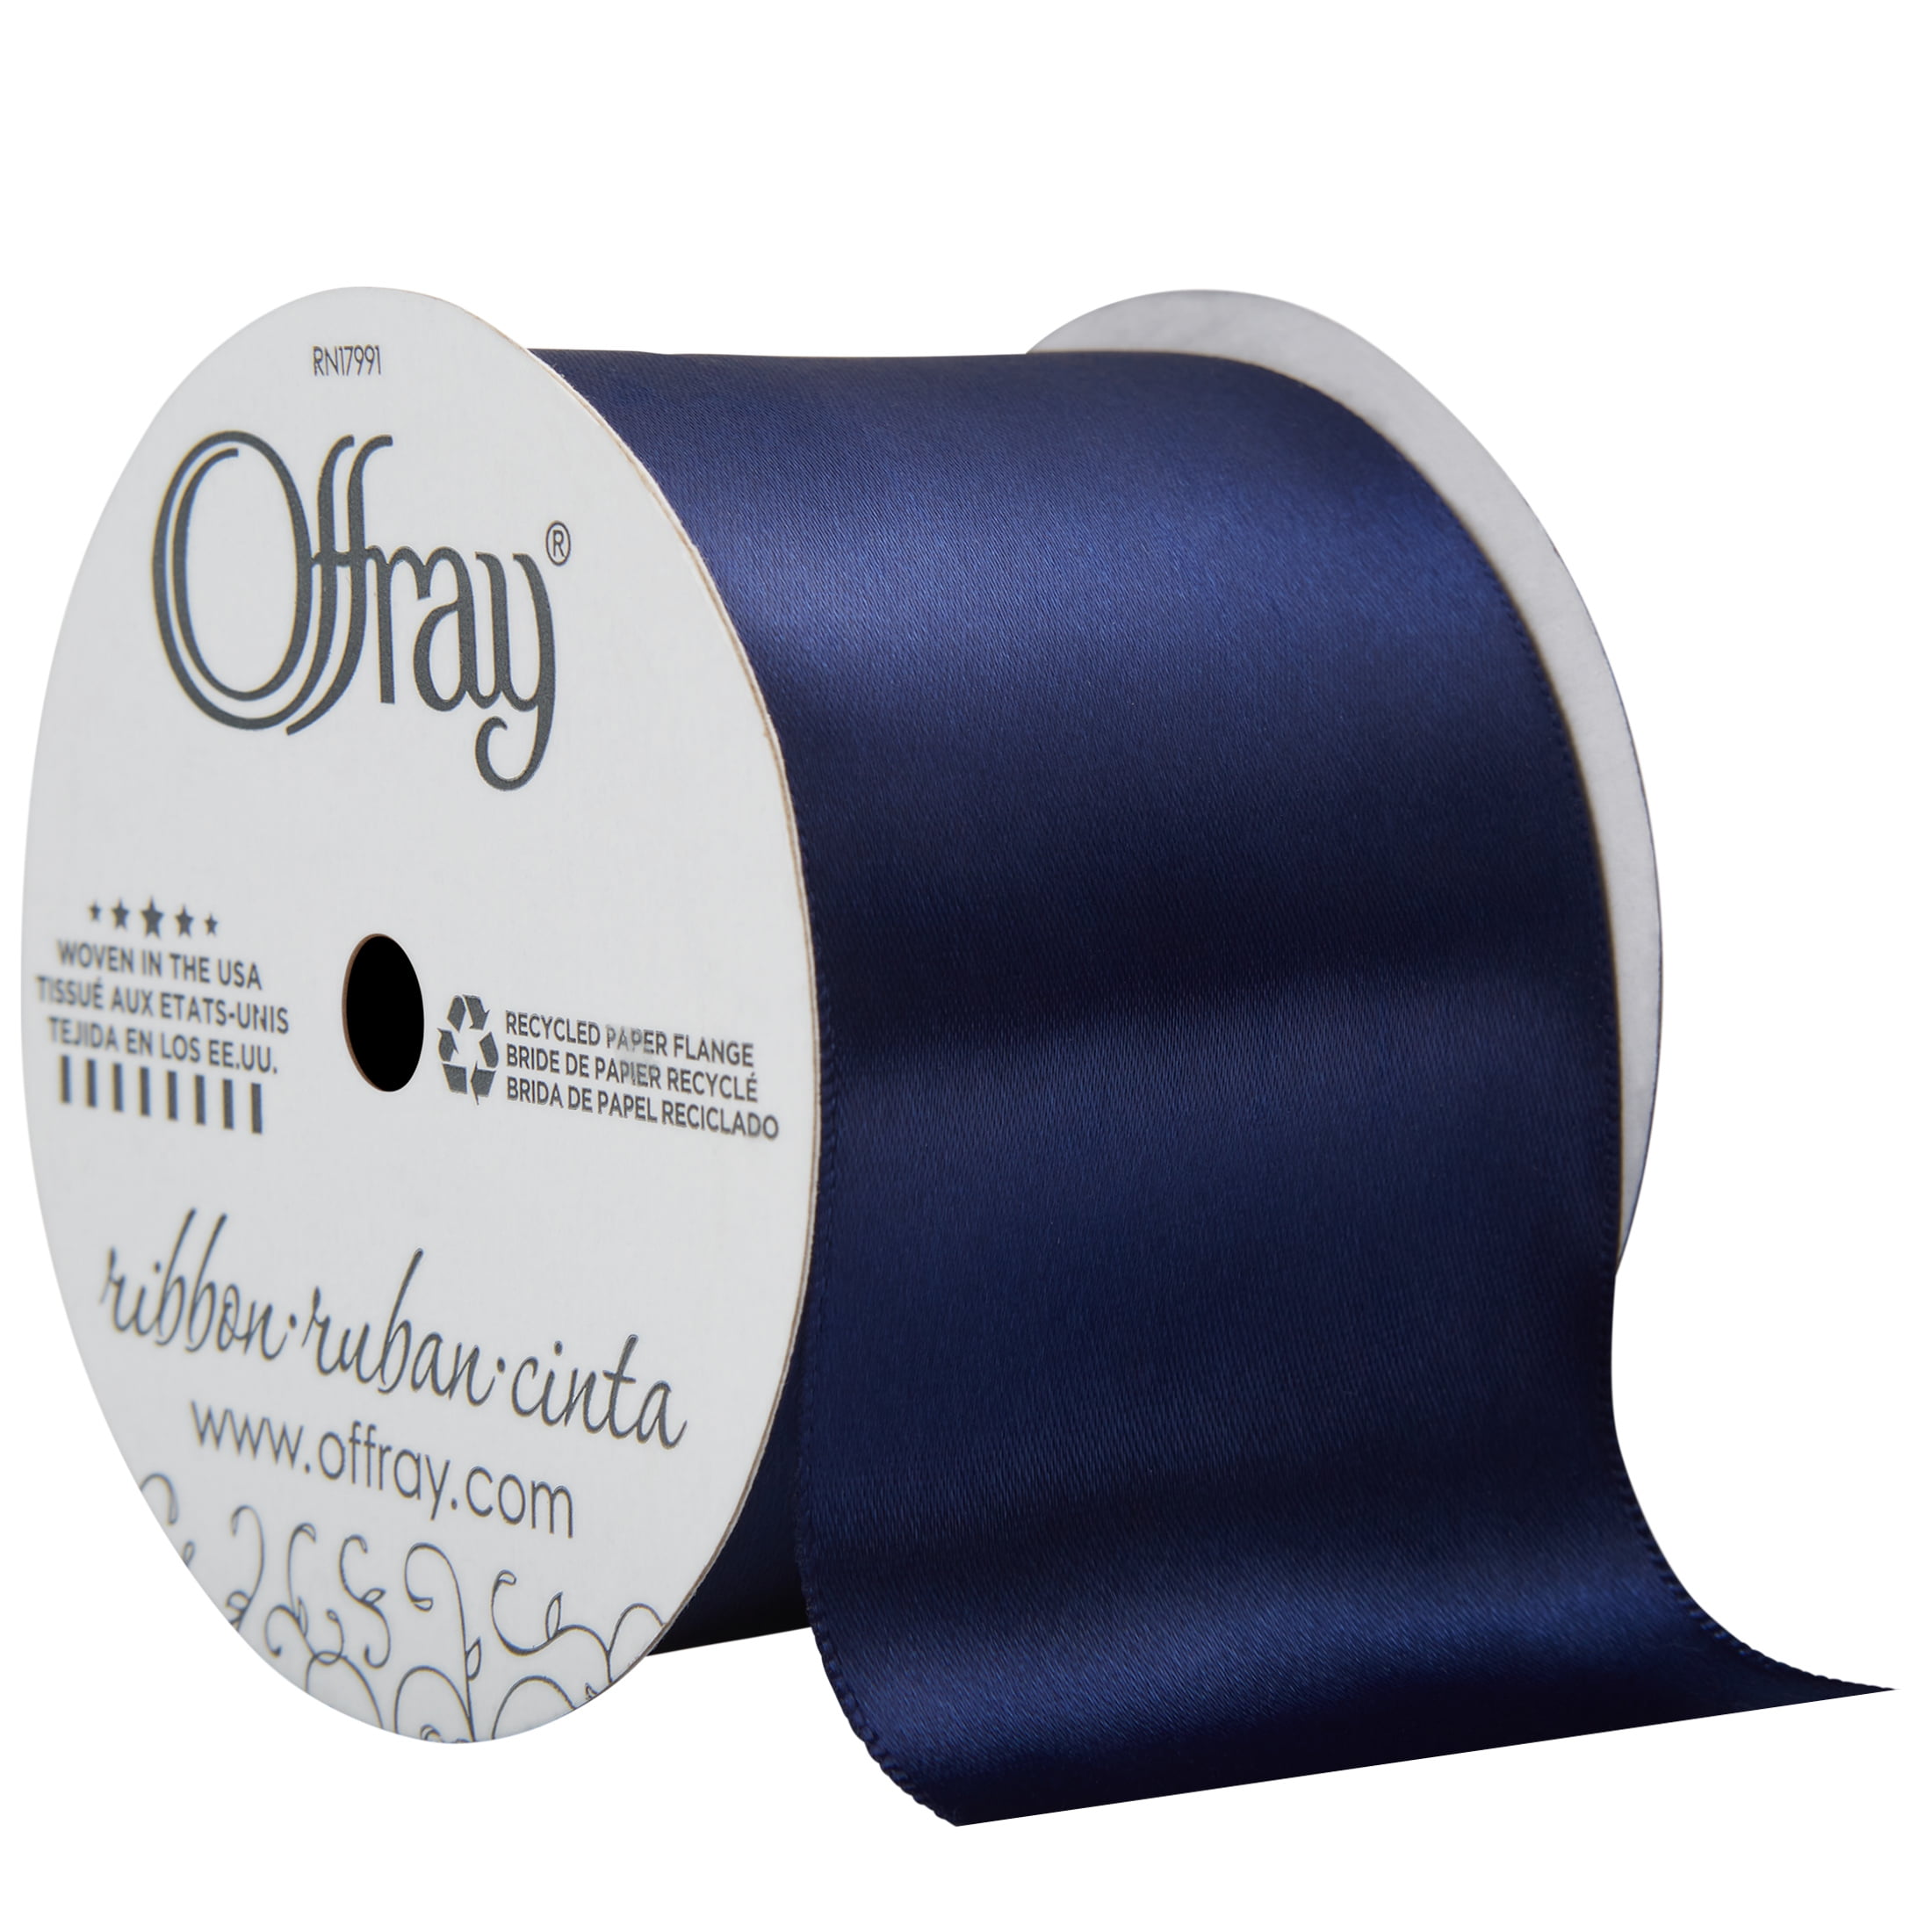 1-1/2 Wide x 100 Yards Single Faced Polyester Royal Blue Satin Ribbon, Perfect for Wedding, Gift Wrapping, Bow Making & Other Projects (Royal Blue)